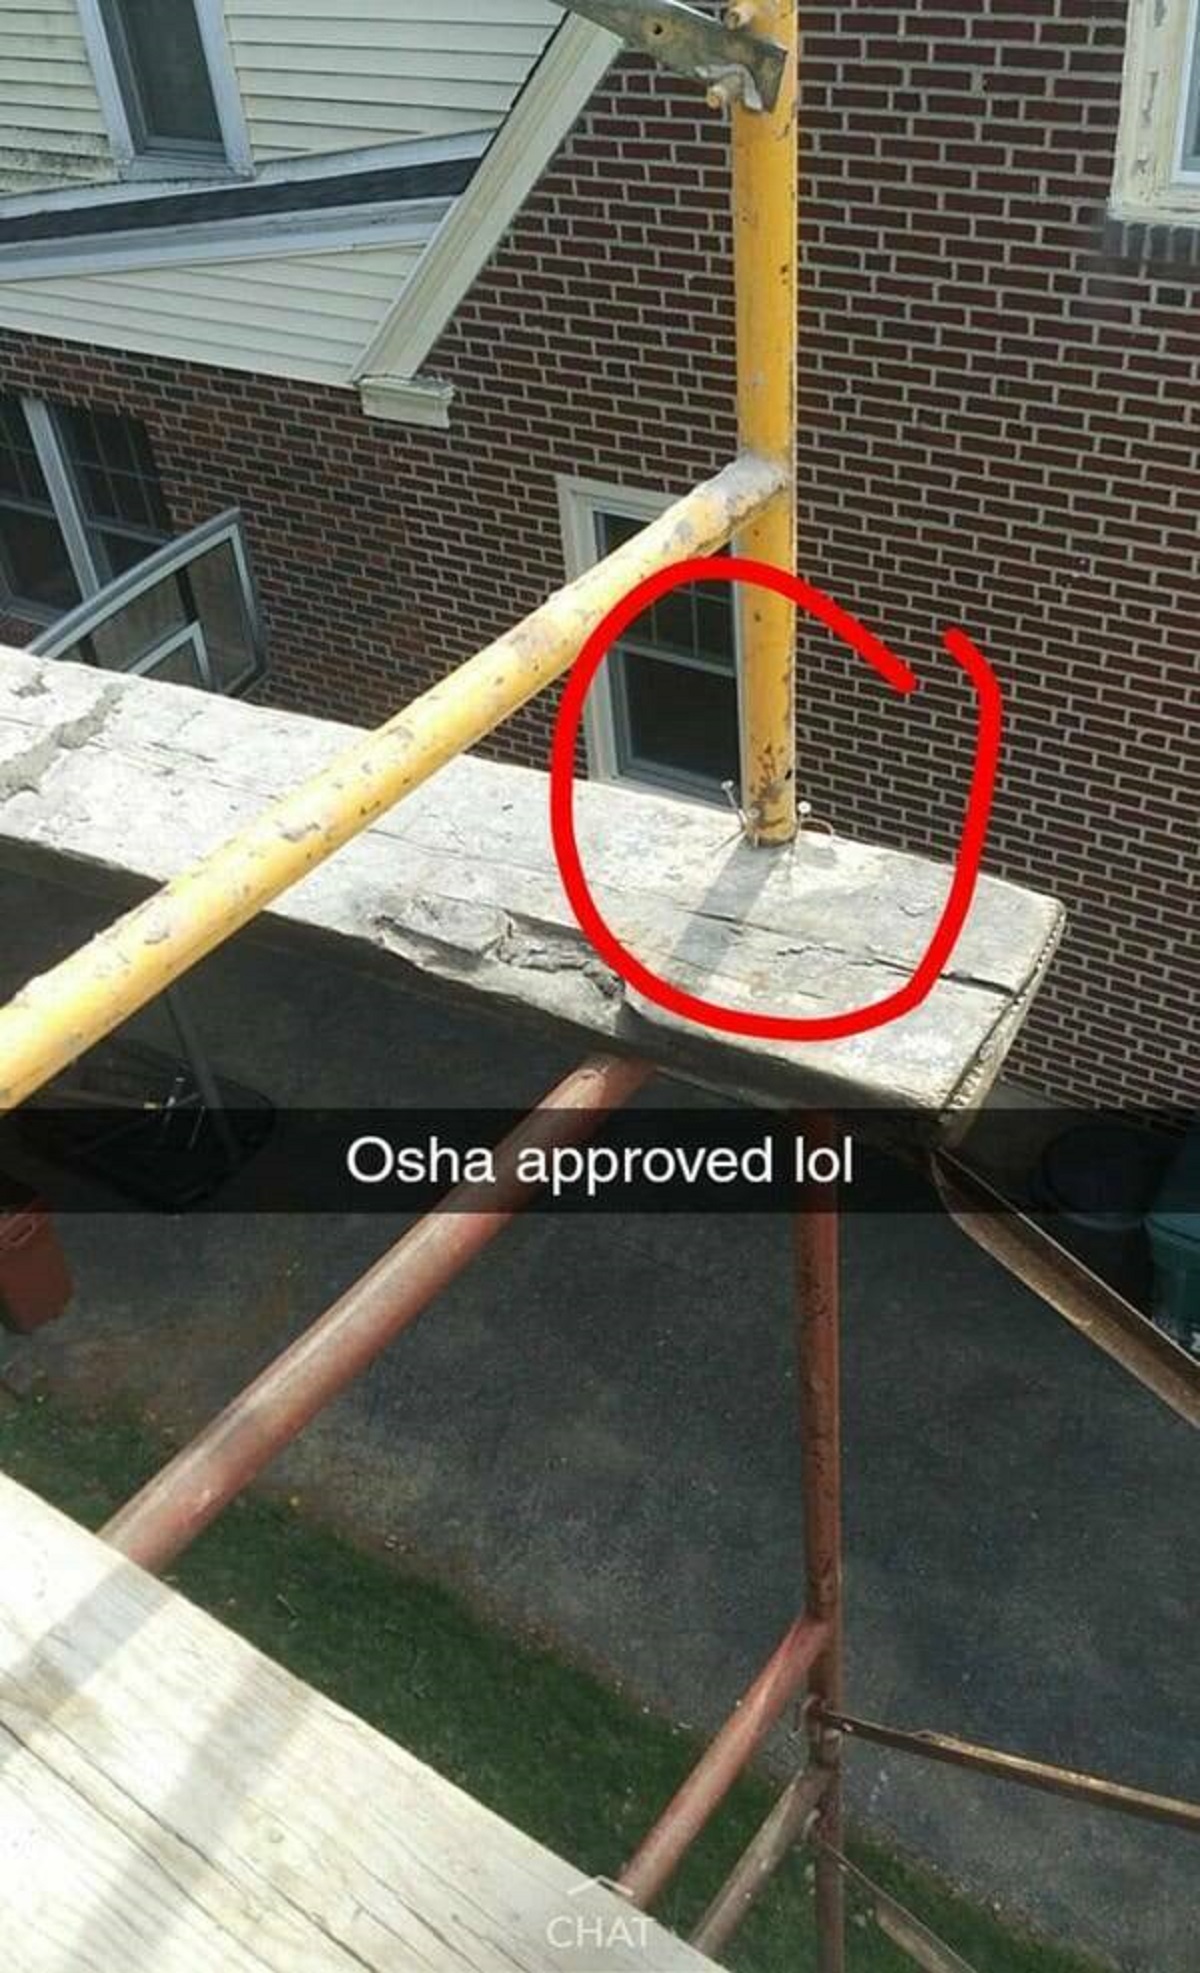 39 Work Safety Fails That Are Not OSHA Compliant 